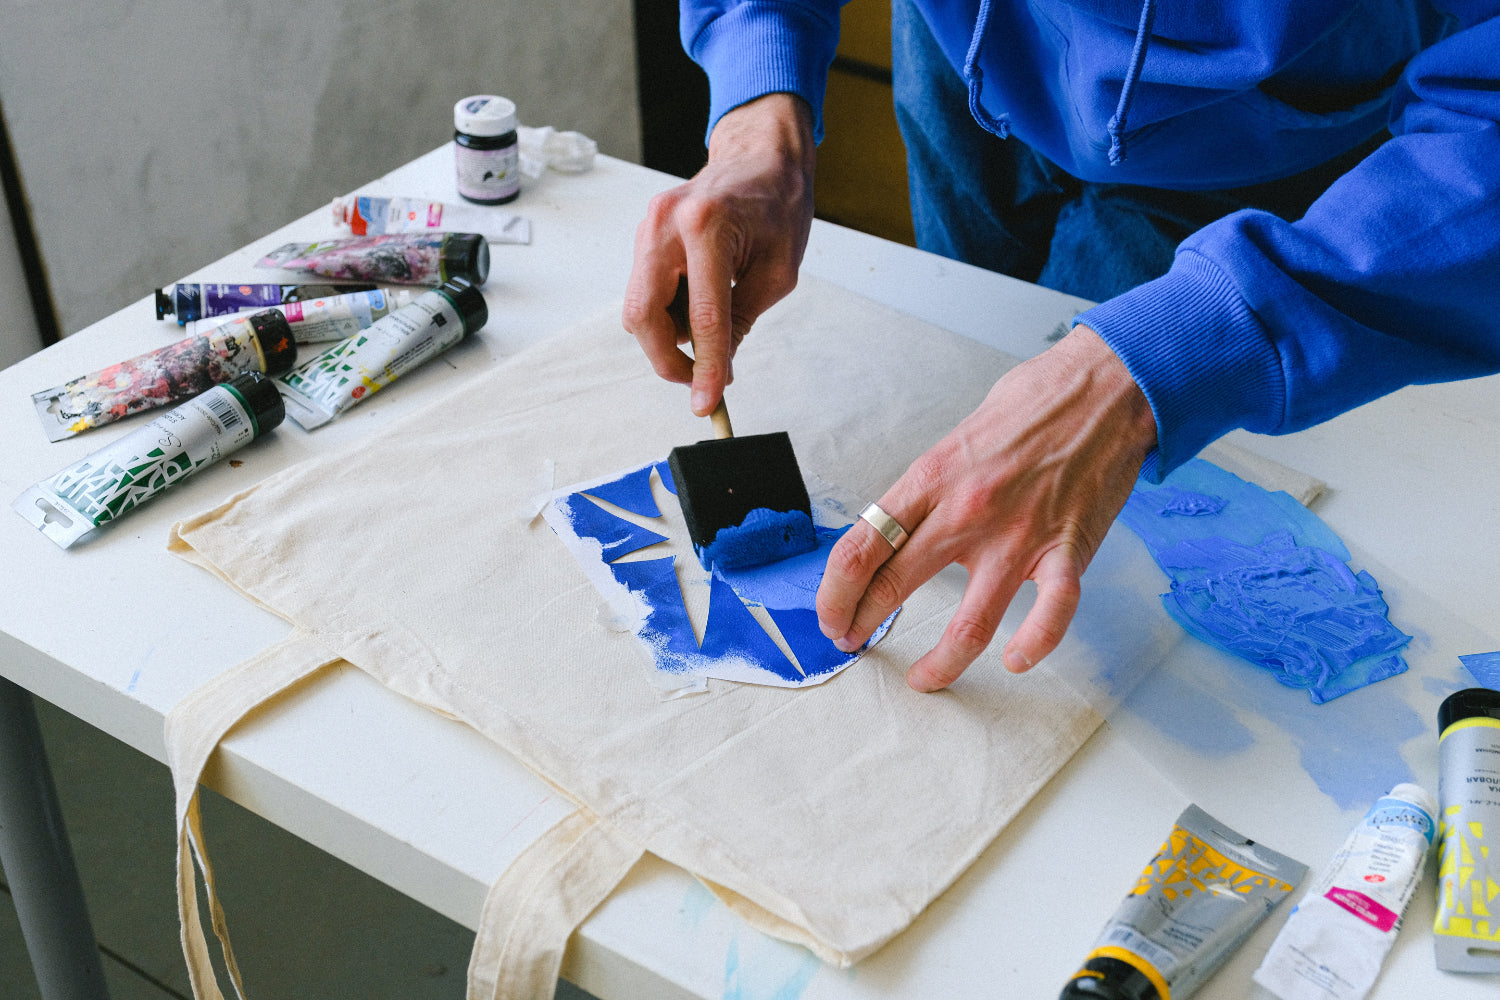 A person makes a merch tote bag using a stencil and blue paint